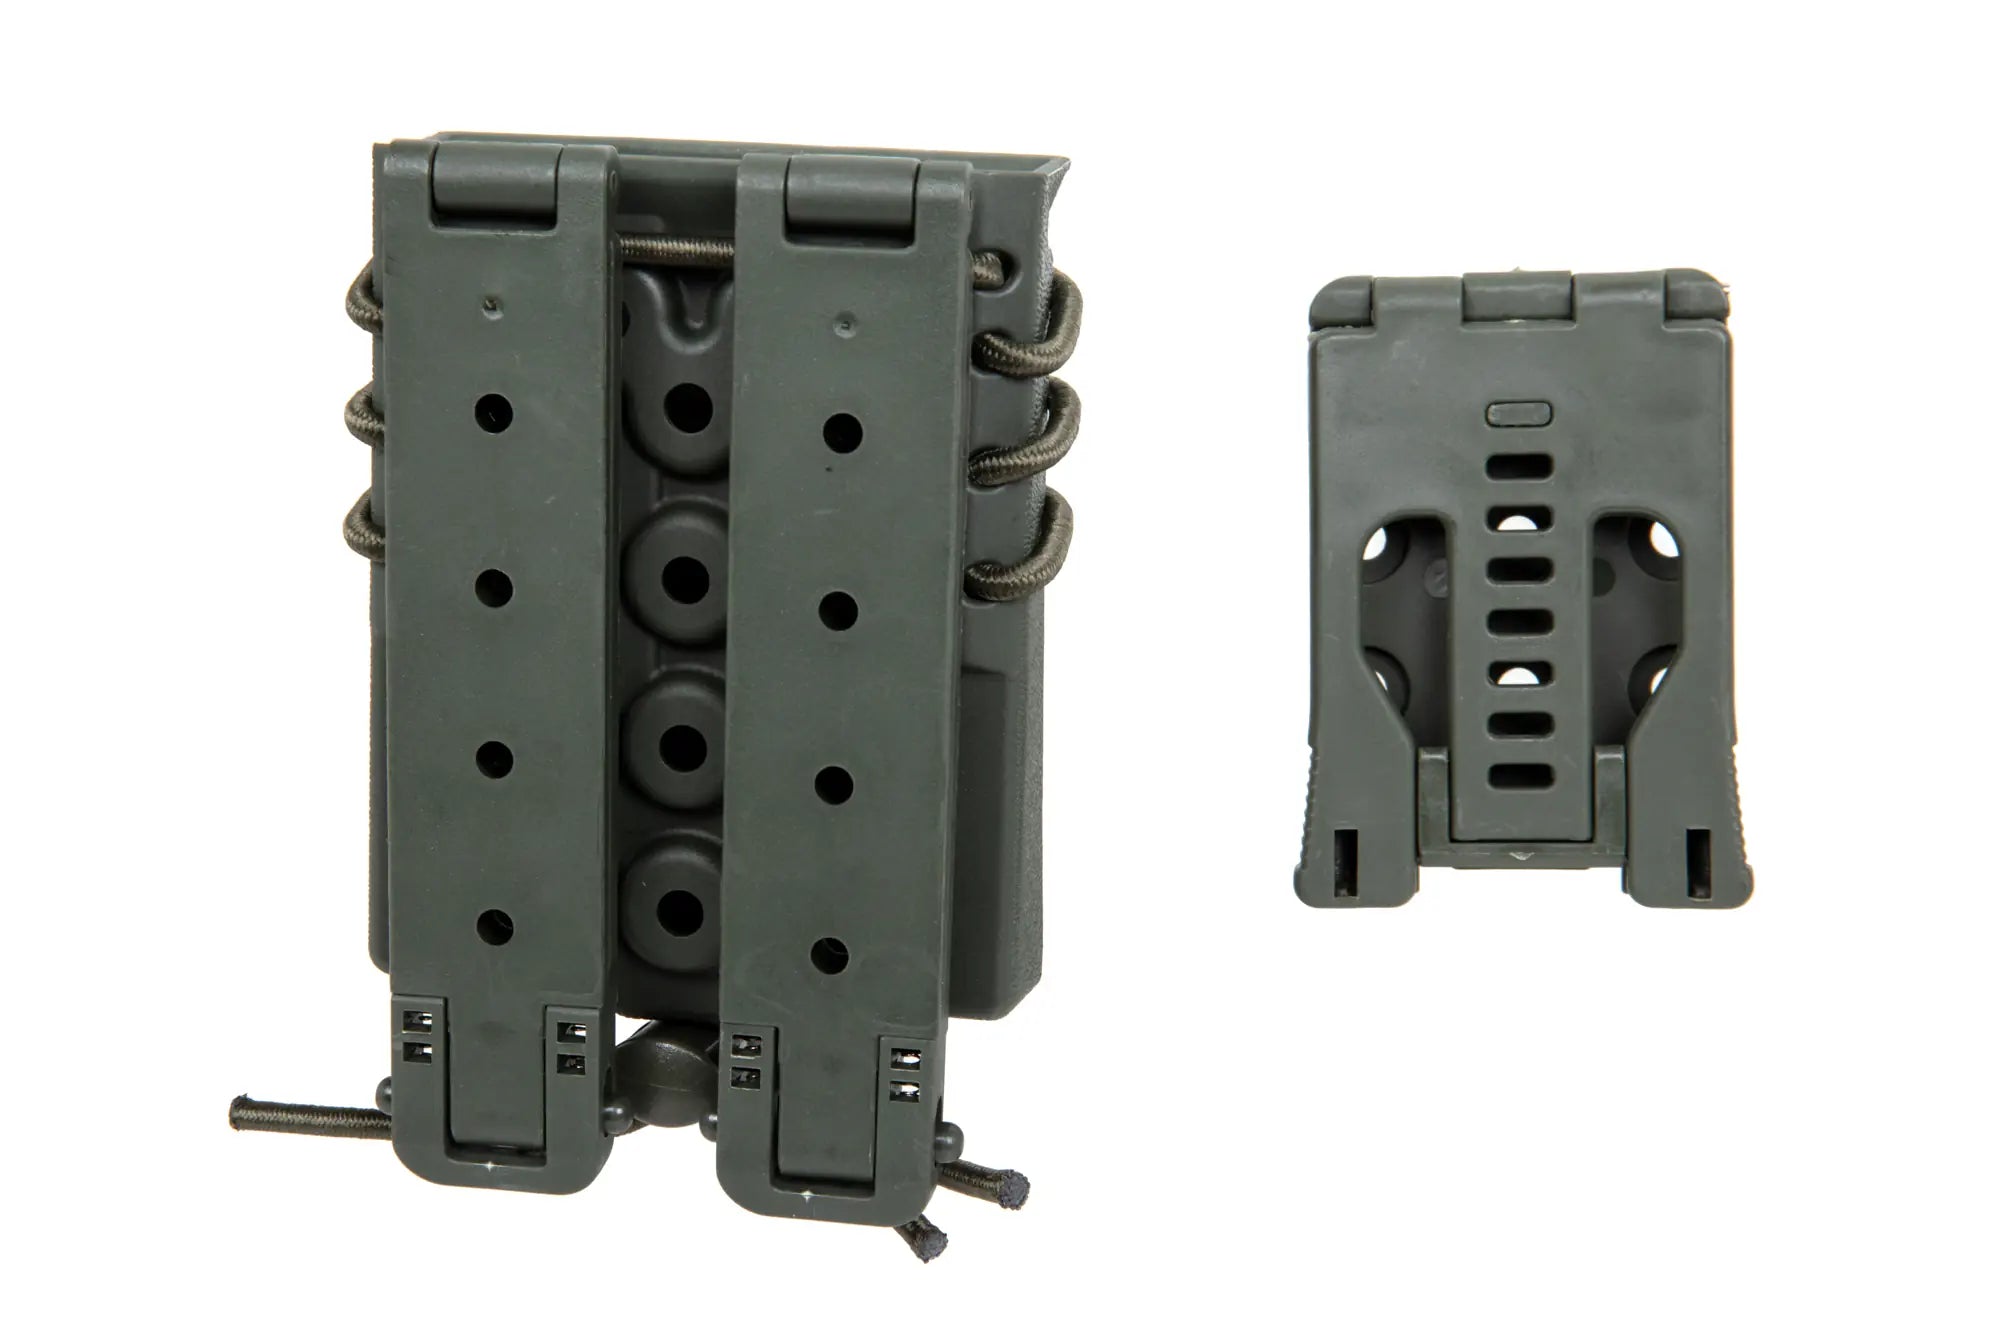 Carrier for 2 M4/M16 and 9mm magazines Wosport Urban Assault Quick Pull Olive-2